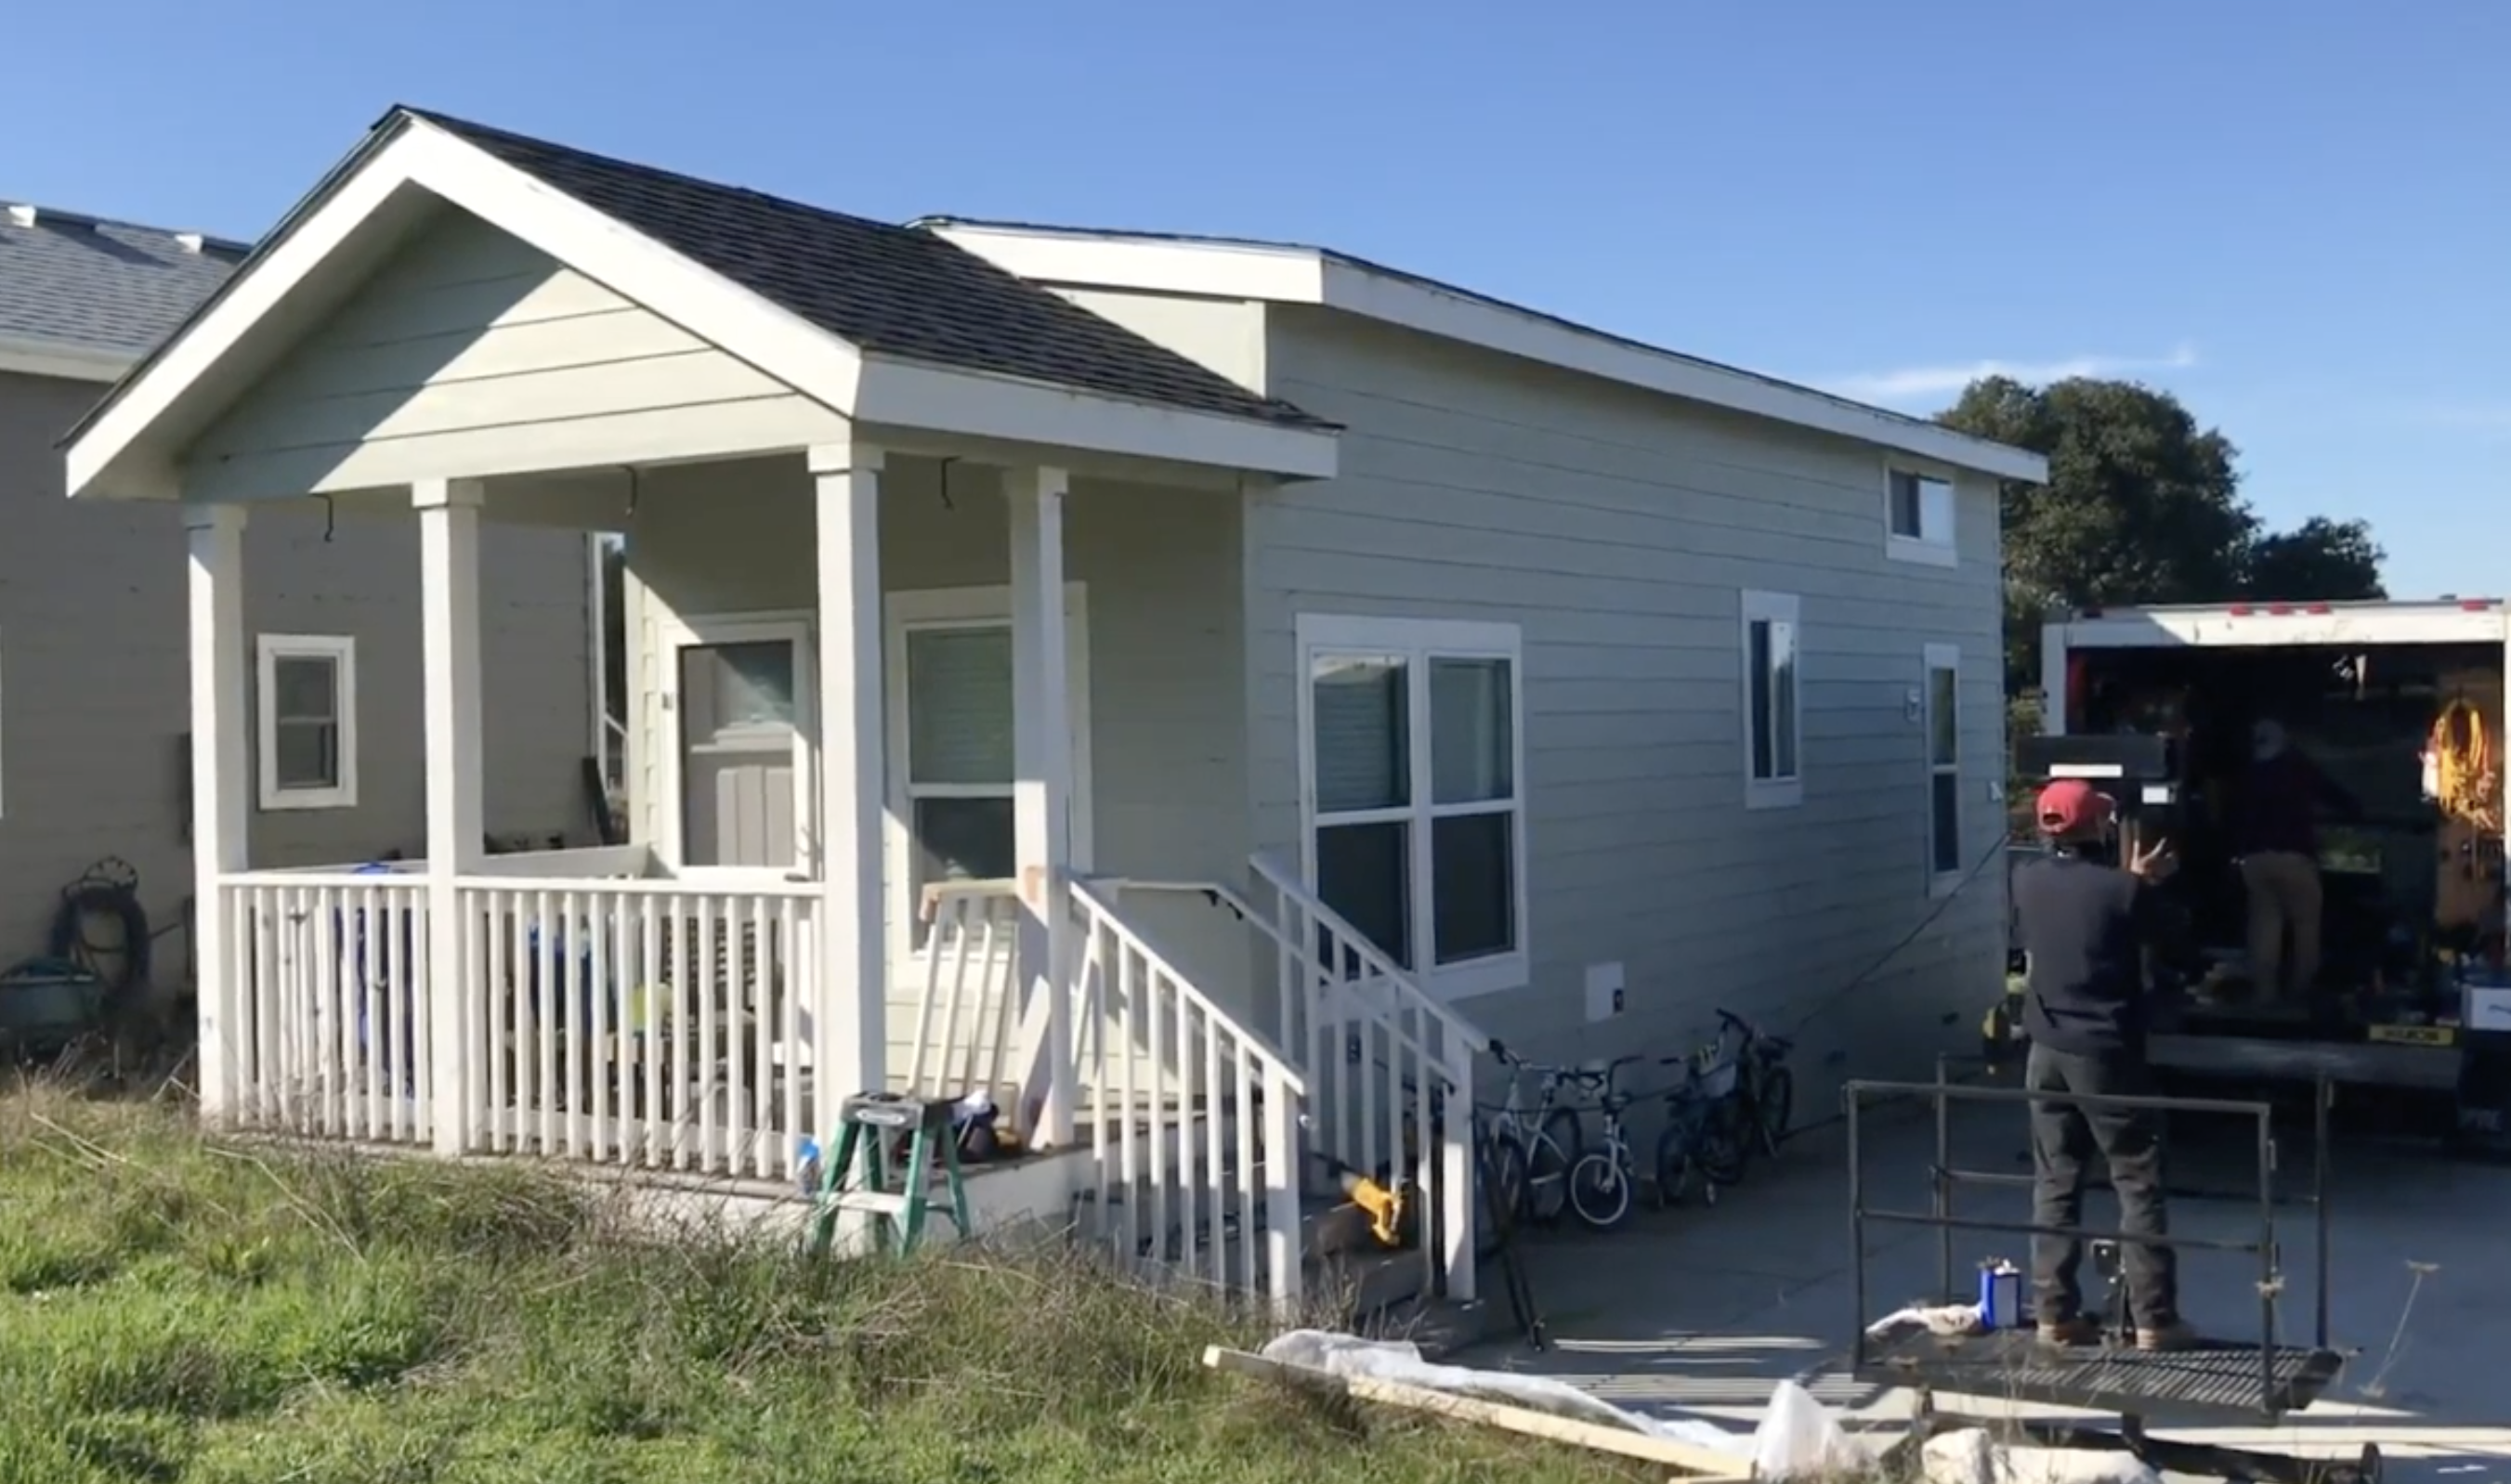 wheelchair ramp is installed on manufactured home, sonoma county